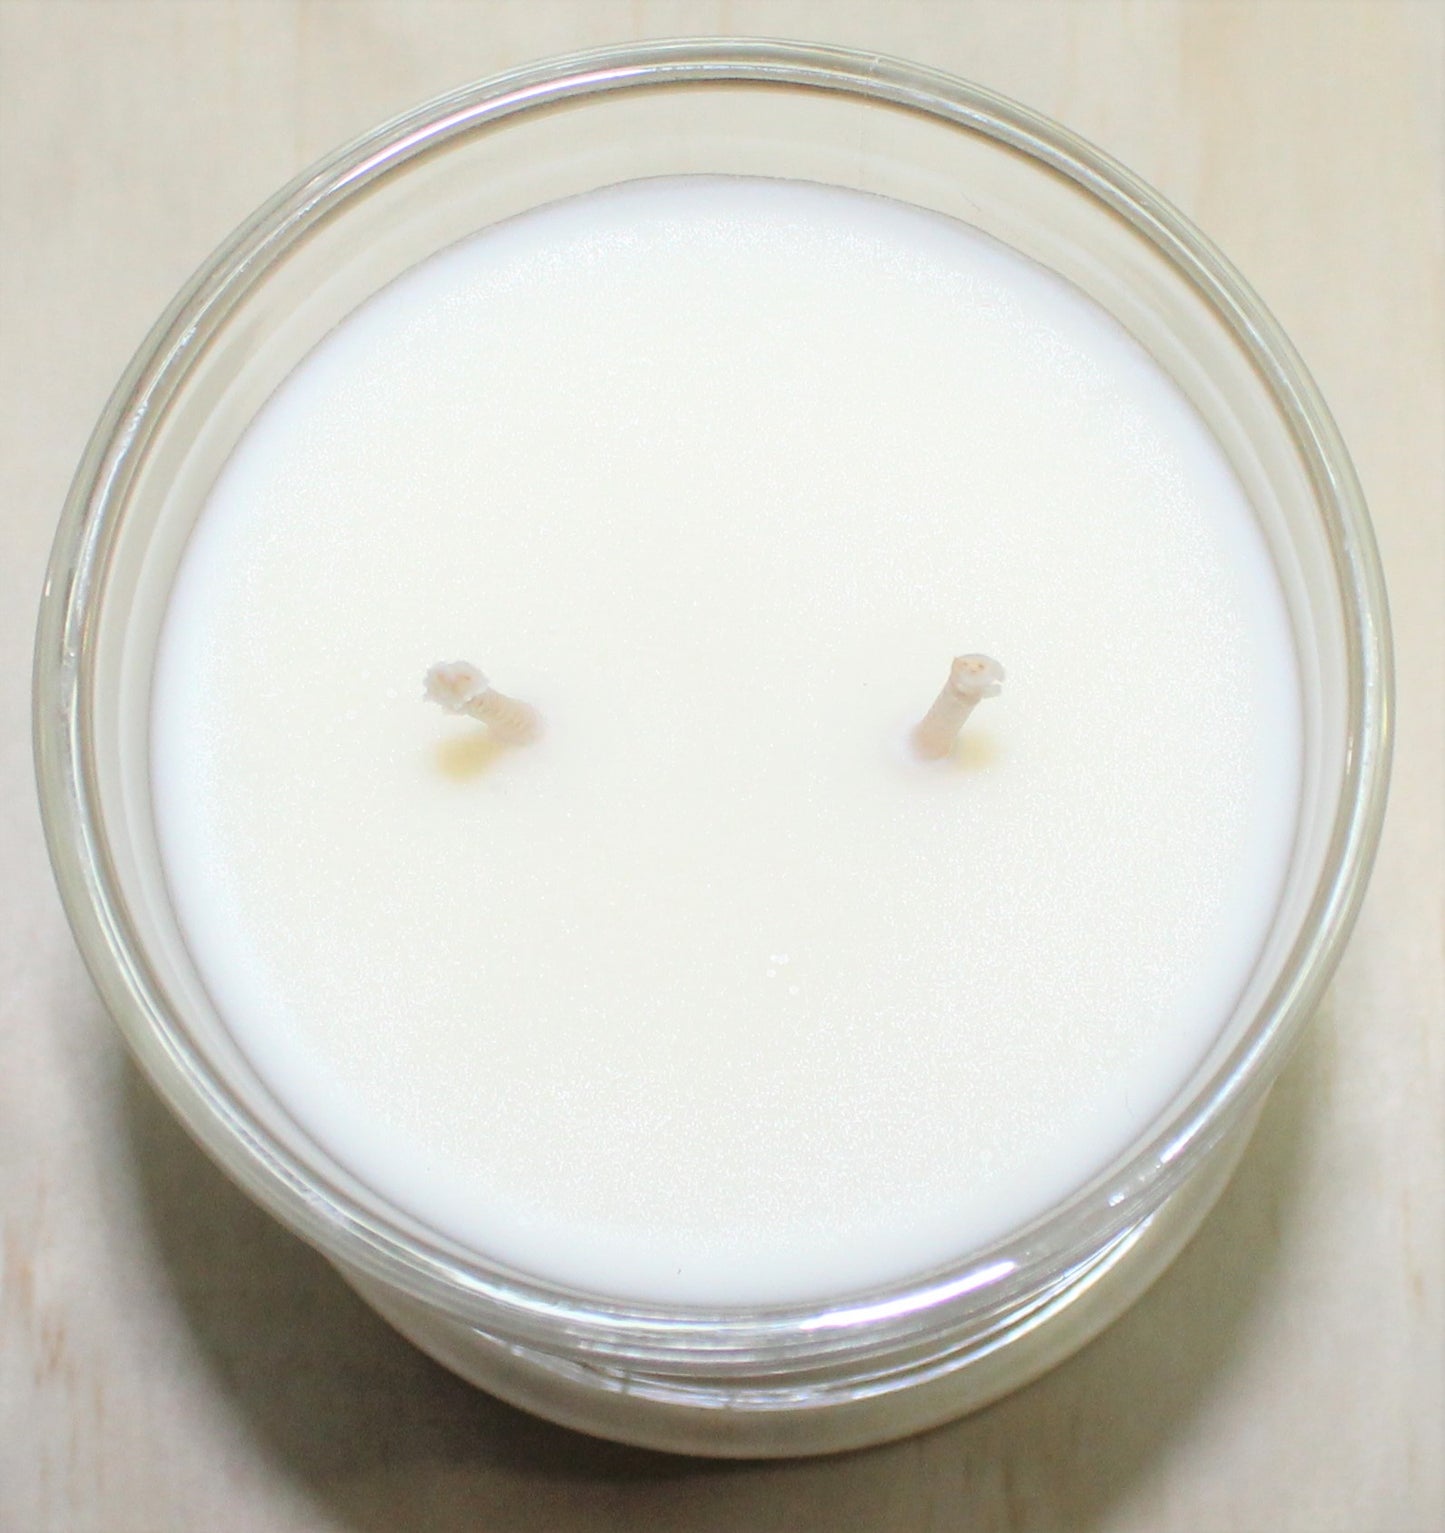 Vanilla Cove Soy Candle 50 hour Coconut and Lime Fragrance in clear glass jar no lid image shows 2 wicks